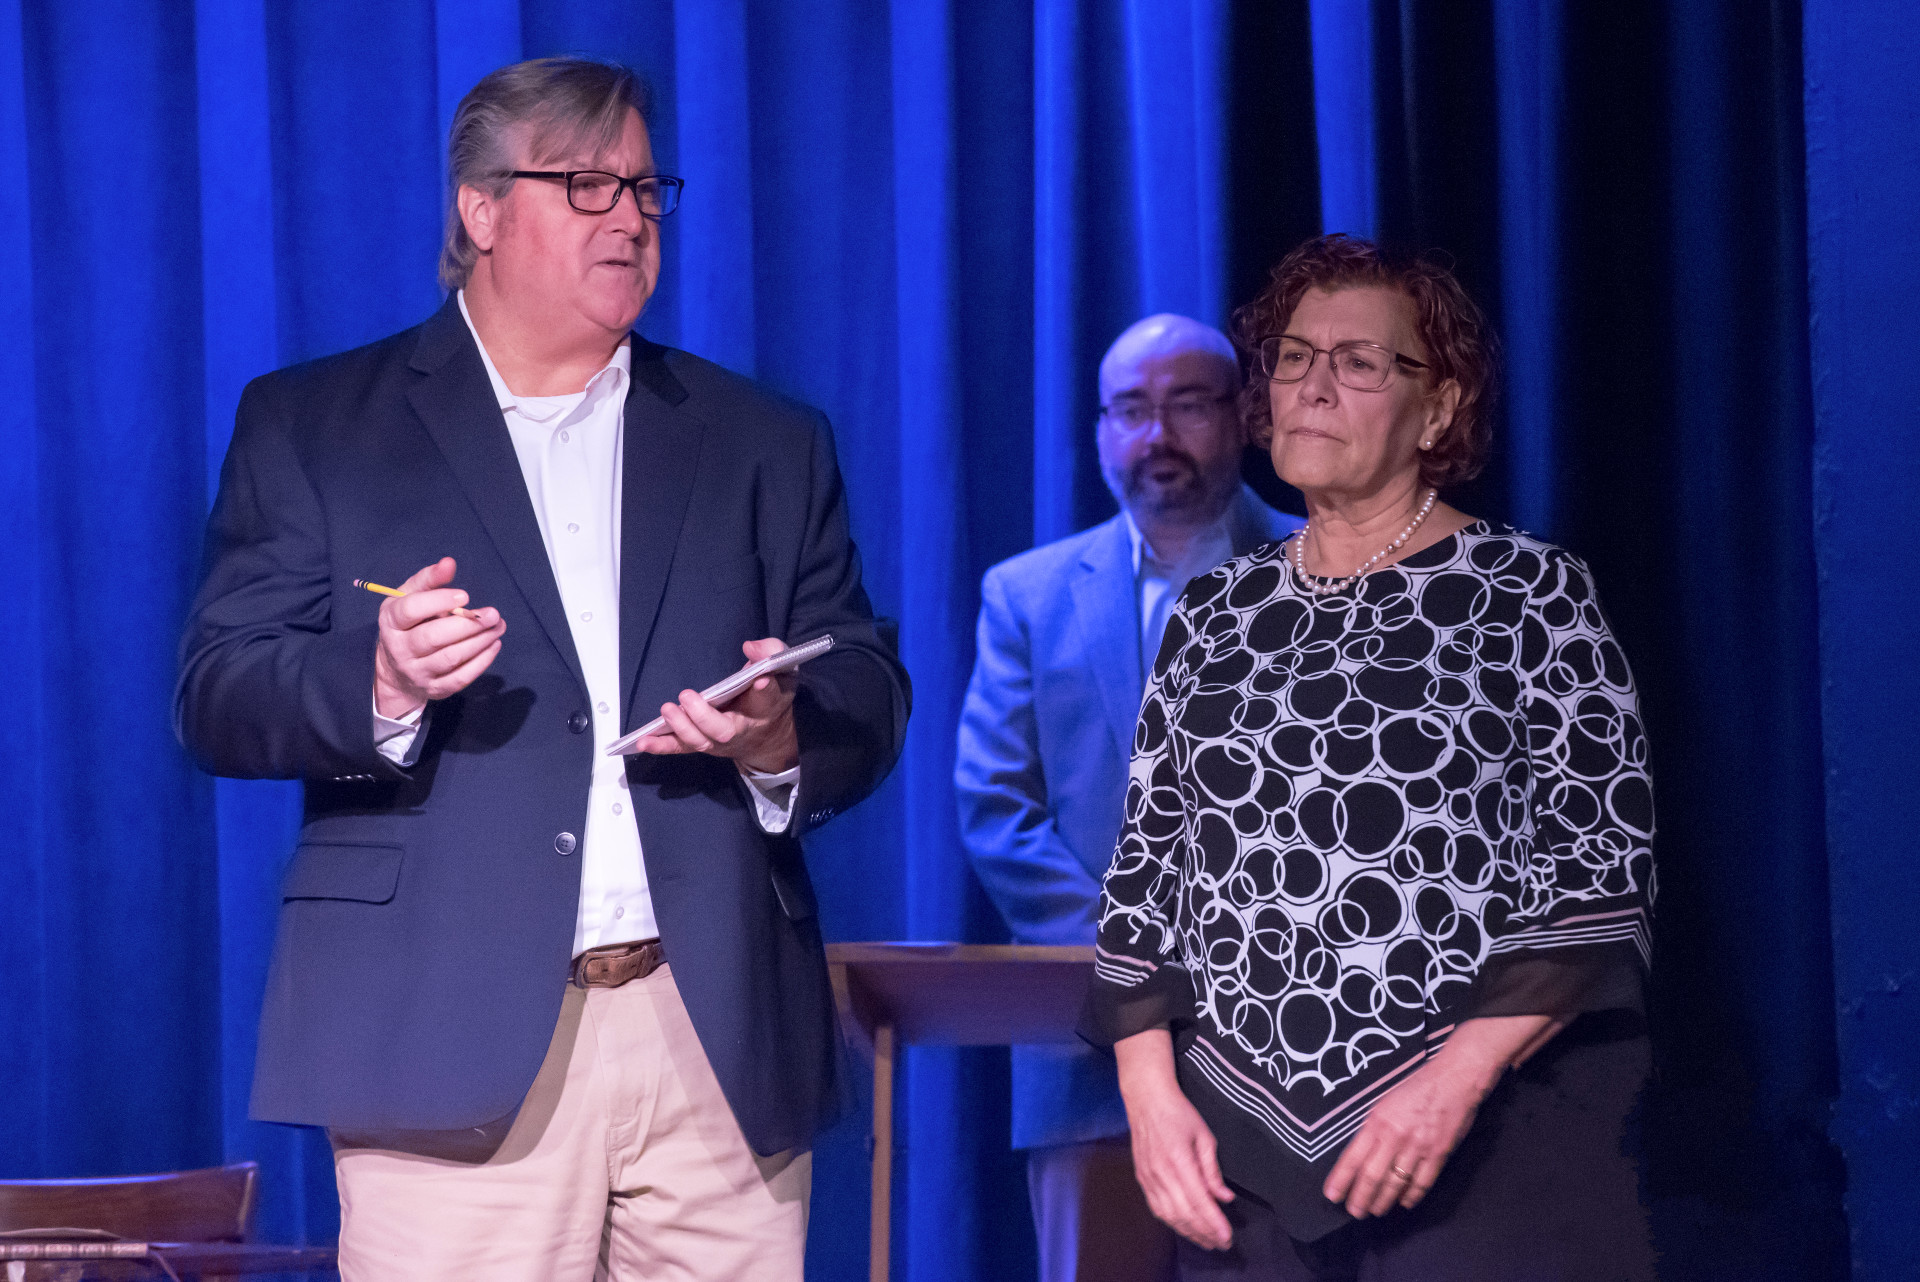 Actor Michael Clendenin (left), in the role of the Interviewer Claude Lanzmann, actress Sherry Bendt (right), portraying Mrs. Pietyra recalling her time at Auschwitz, and actor Ricardo Padilla (center) portraying Holocaust scholar Raul Hilberg in Fauquier Community Theatre's production of SHOAH. Photo Credit: Stephen Rummel Photography.